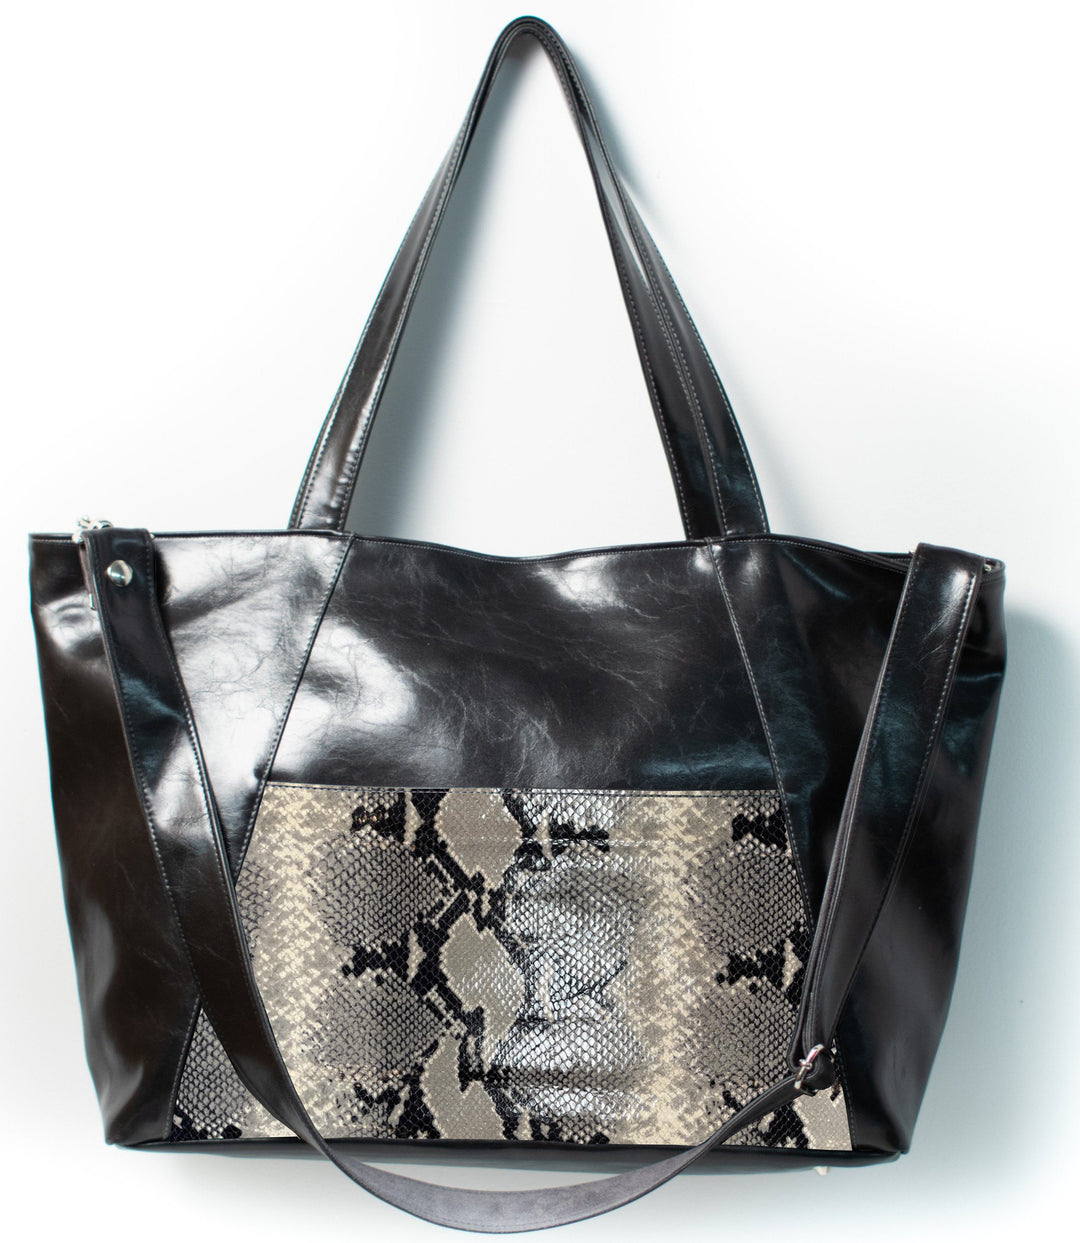 XL Troubadour Weekender Tote - Black with Python